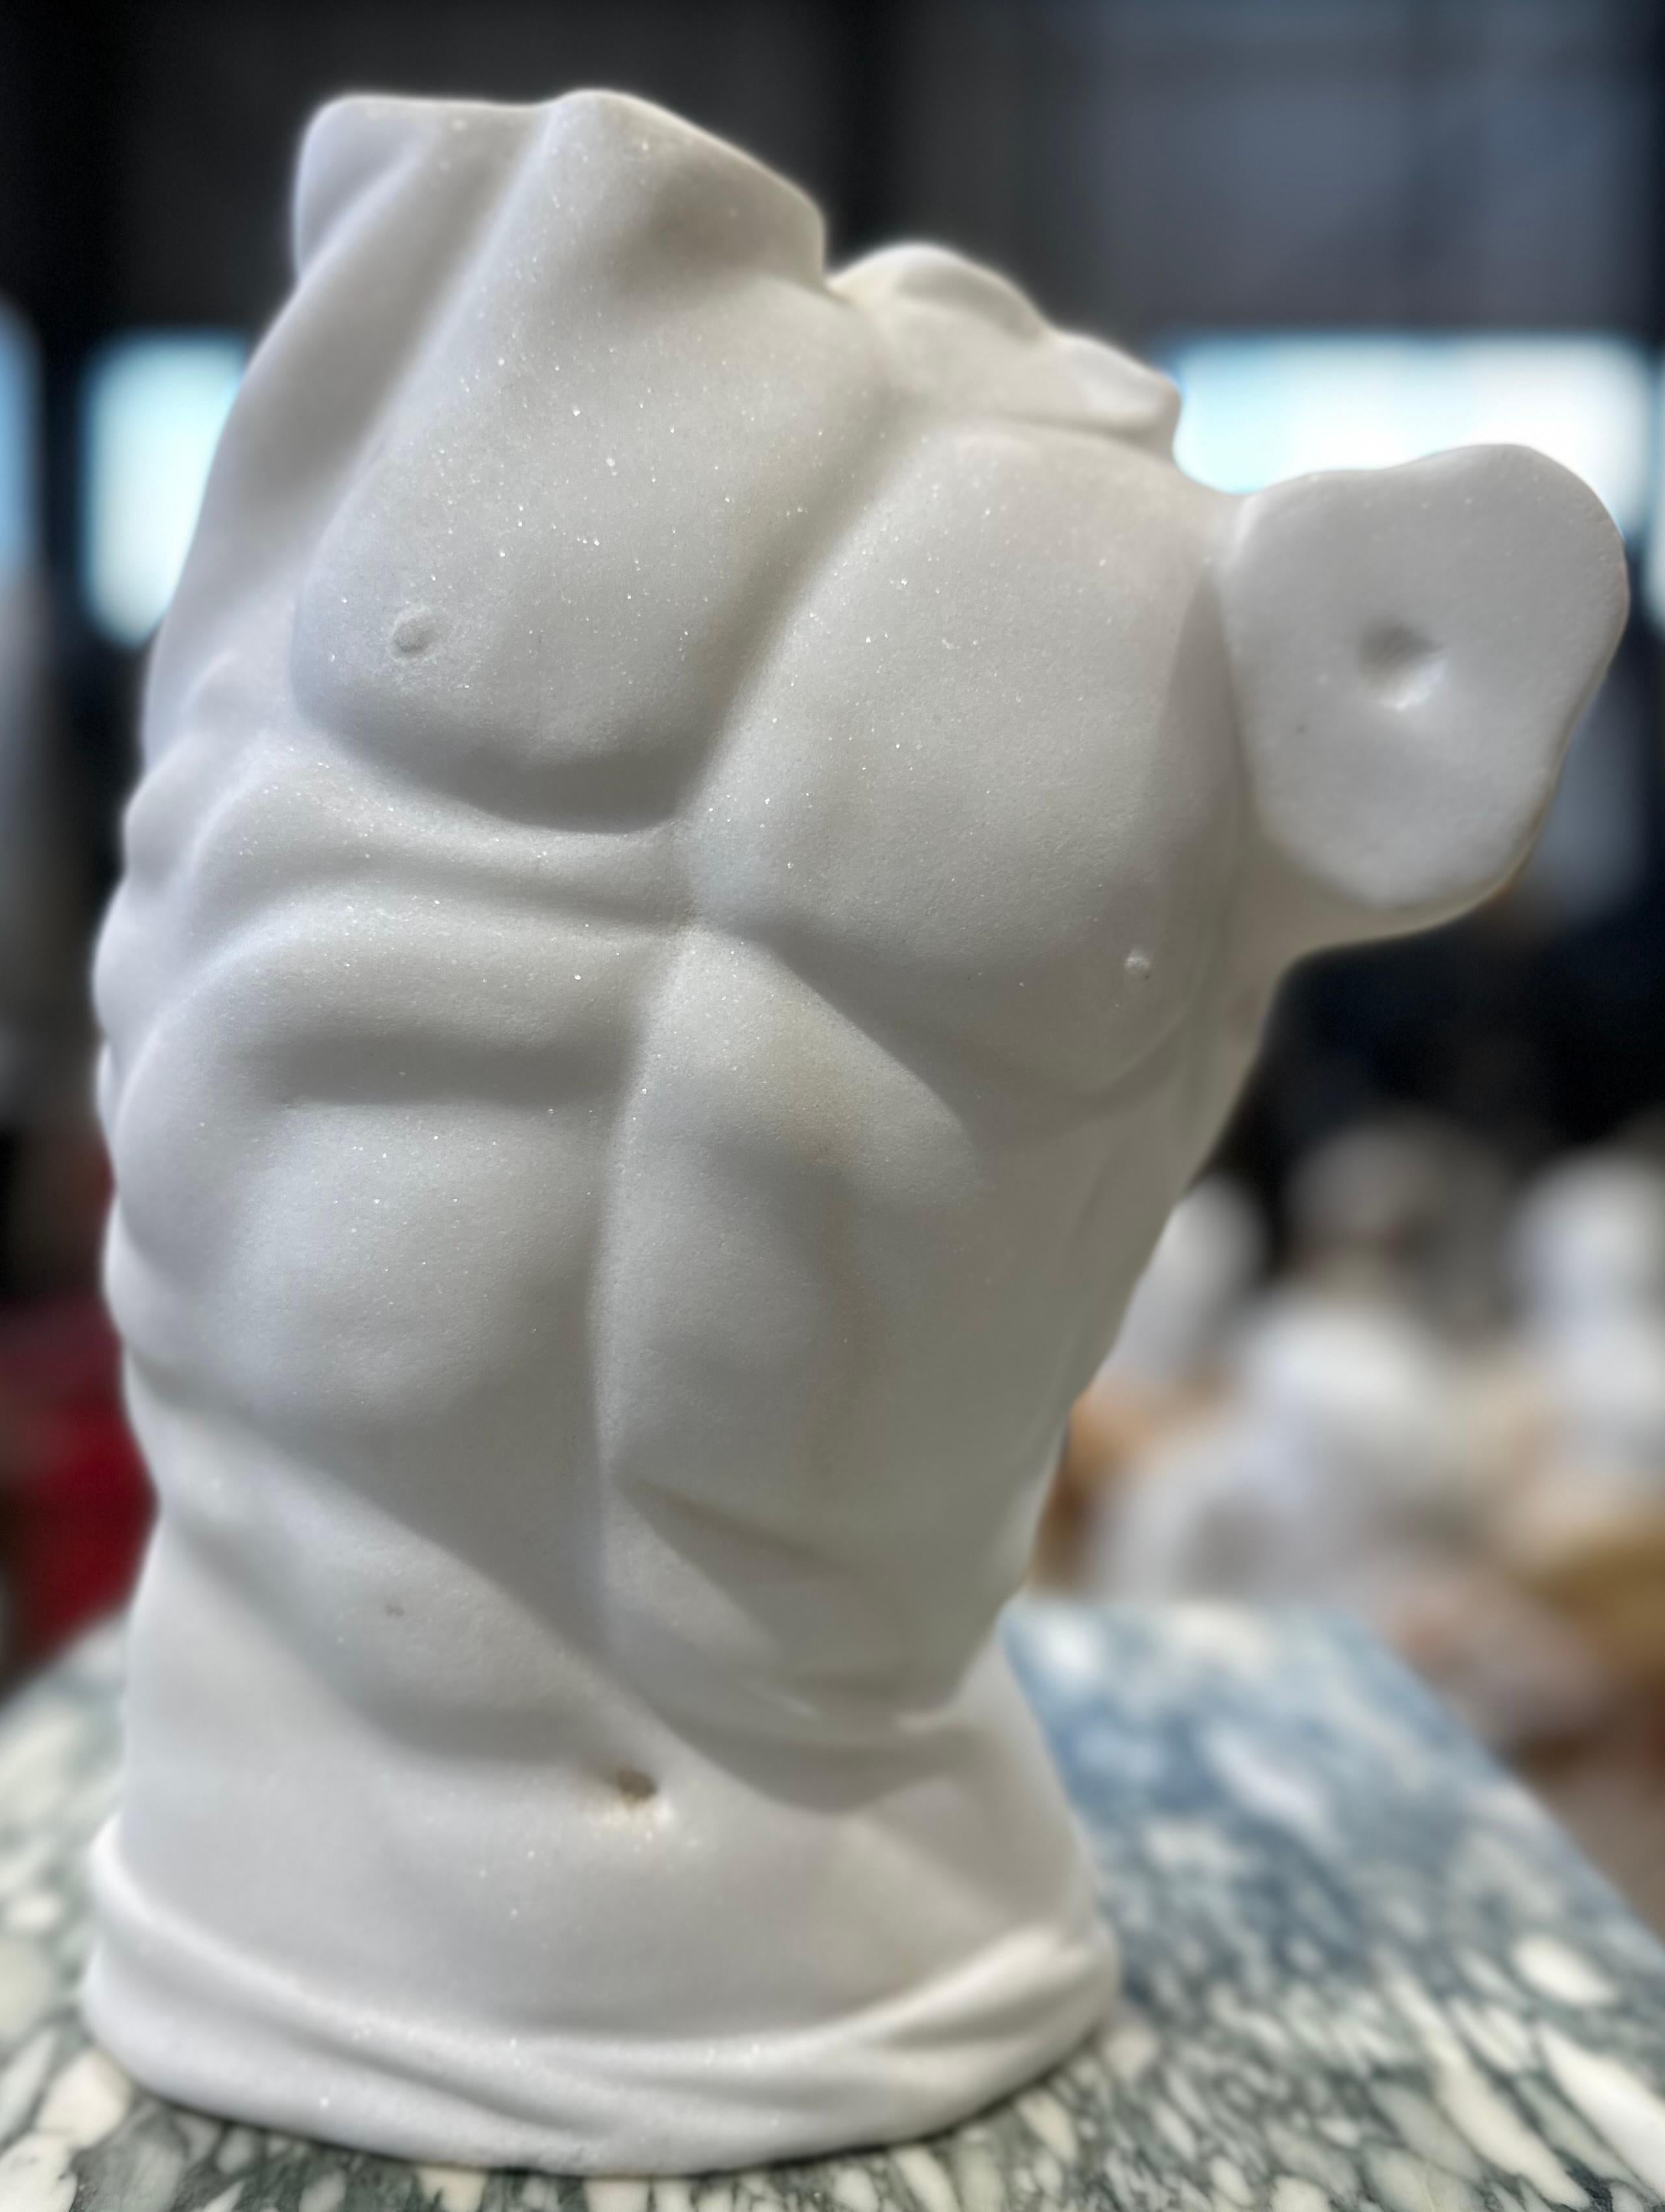 Handsomely hand carved marble male torso in white marble. The body is contoured and defined twisted into a classically inspired pose that emphasises the muscles and smoothness of the marble. A attractive piece that would be sure to draw many